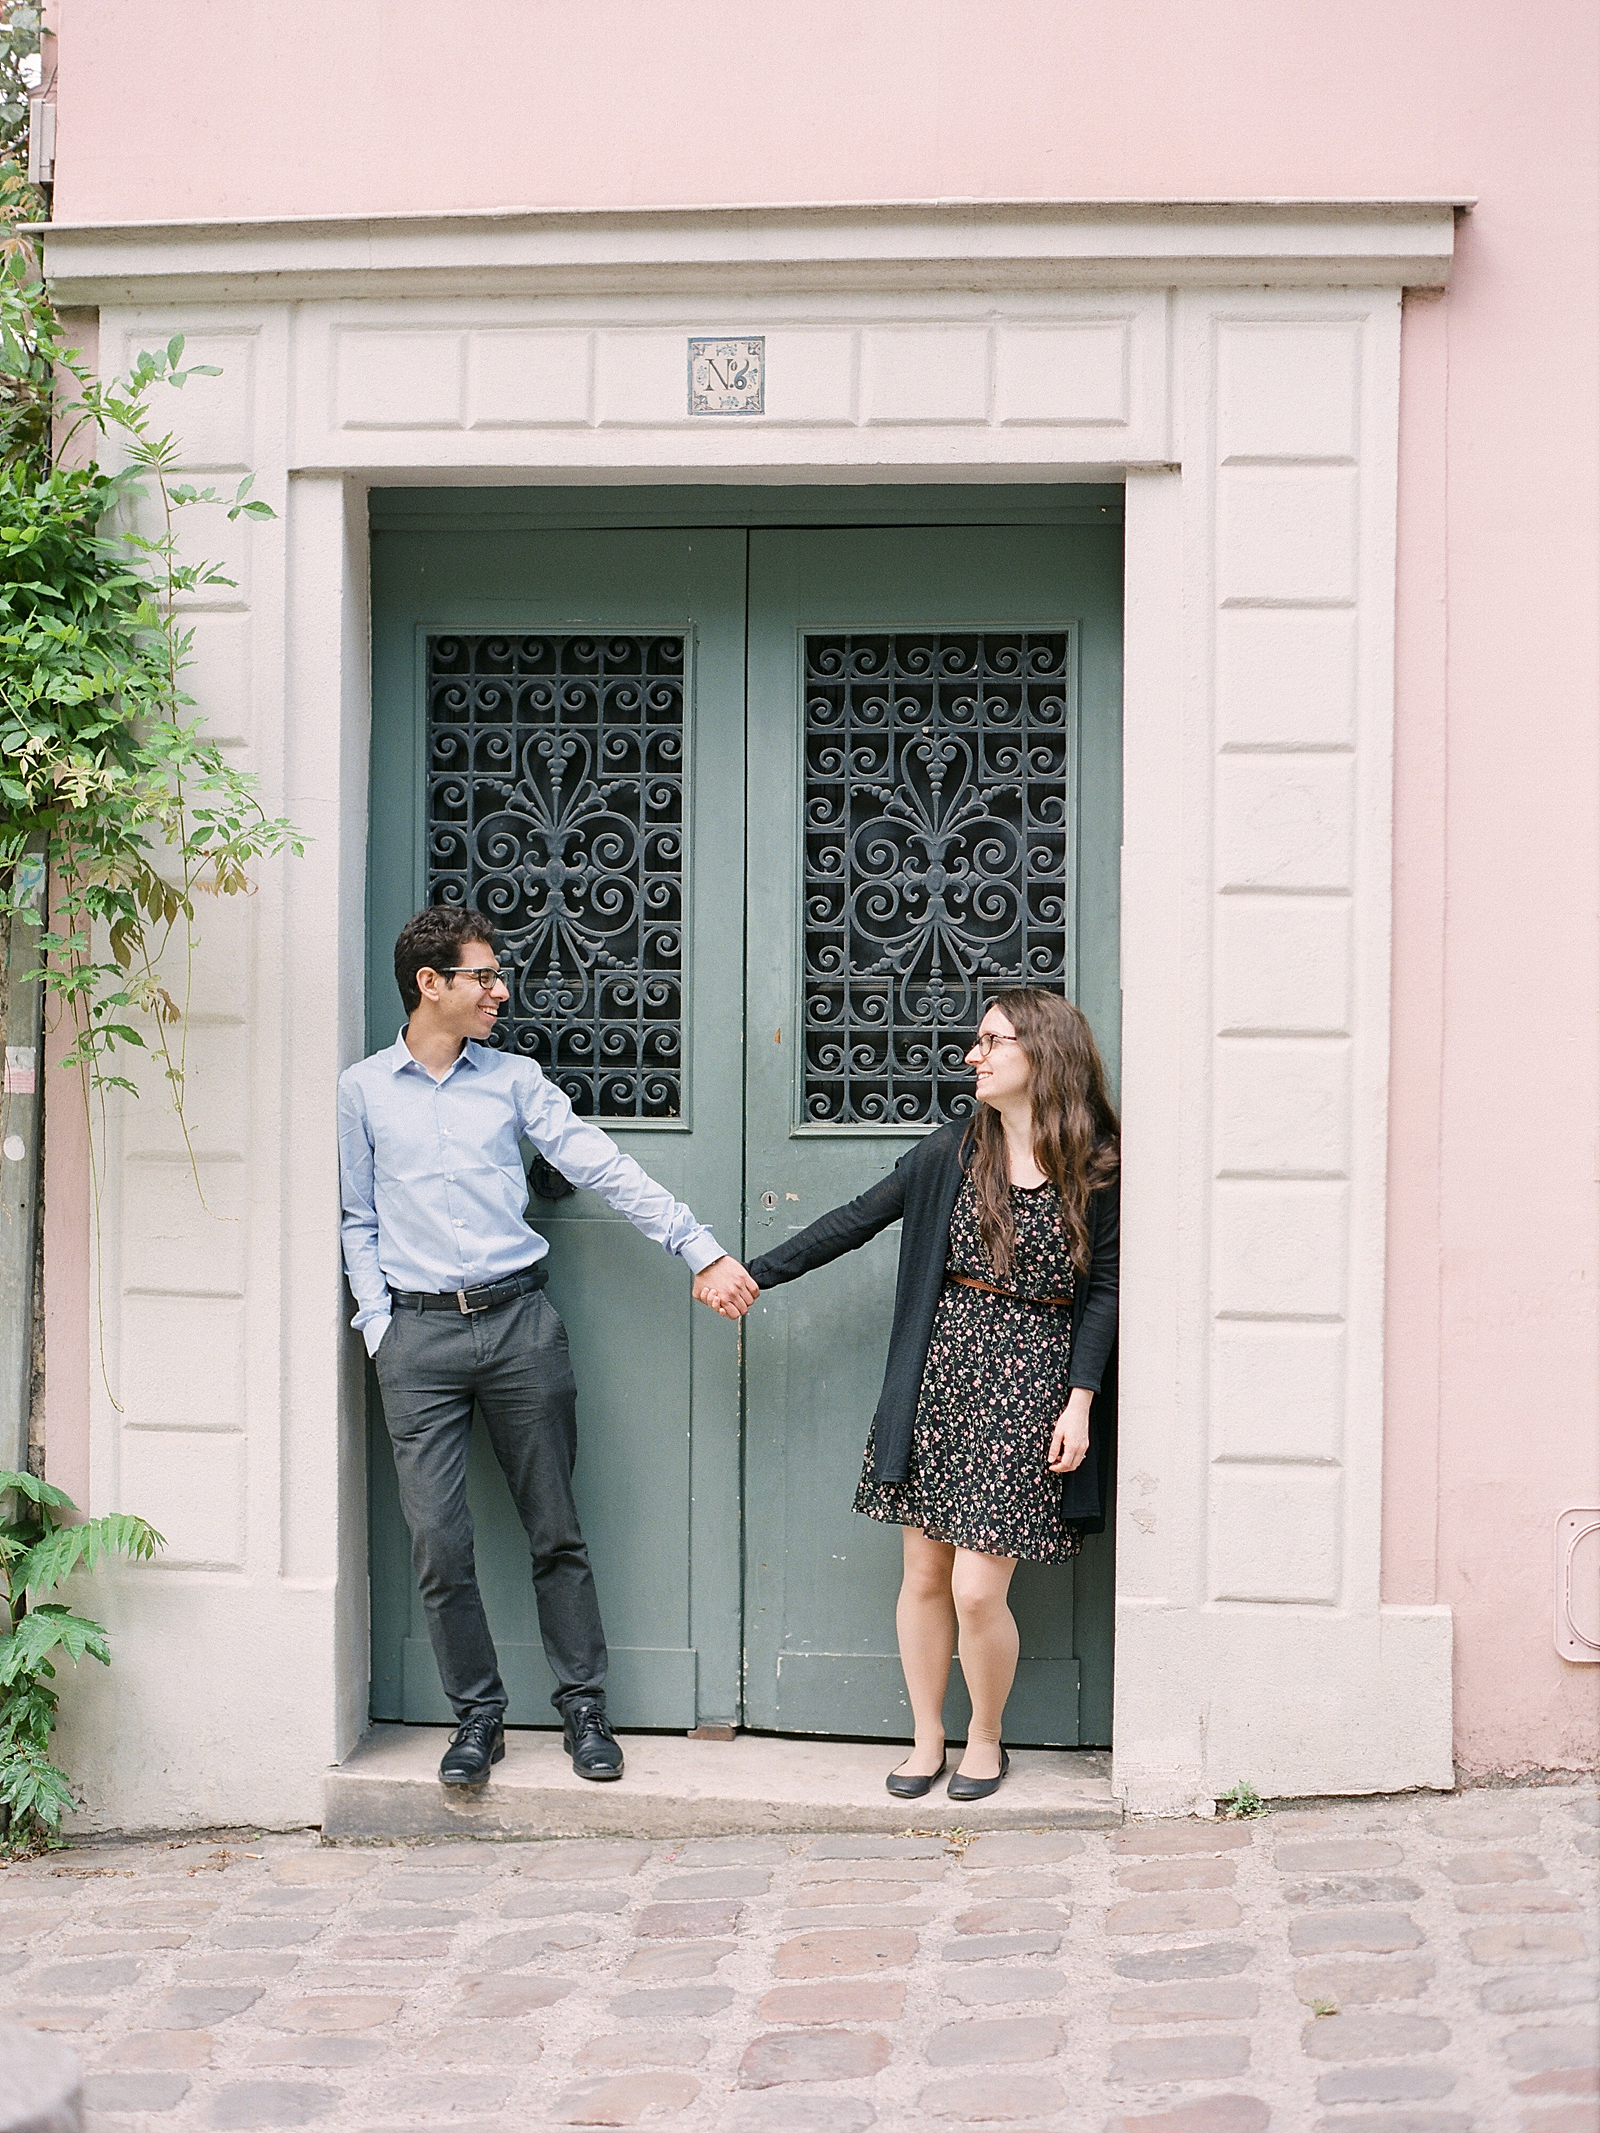 Eiffel Tower Engagement Session Couple holding hands in doorway Photo